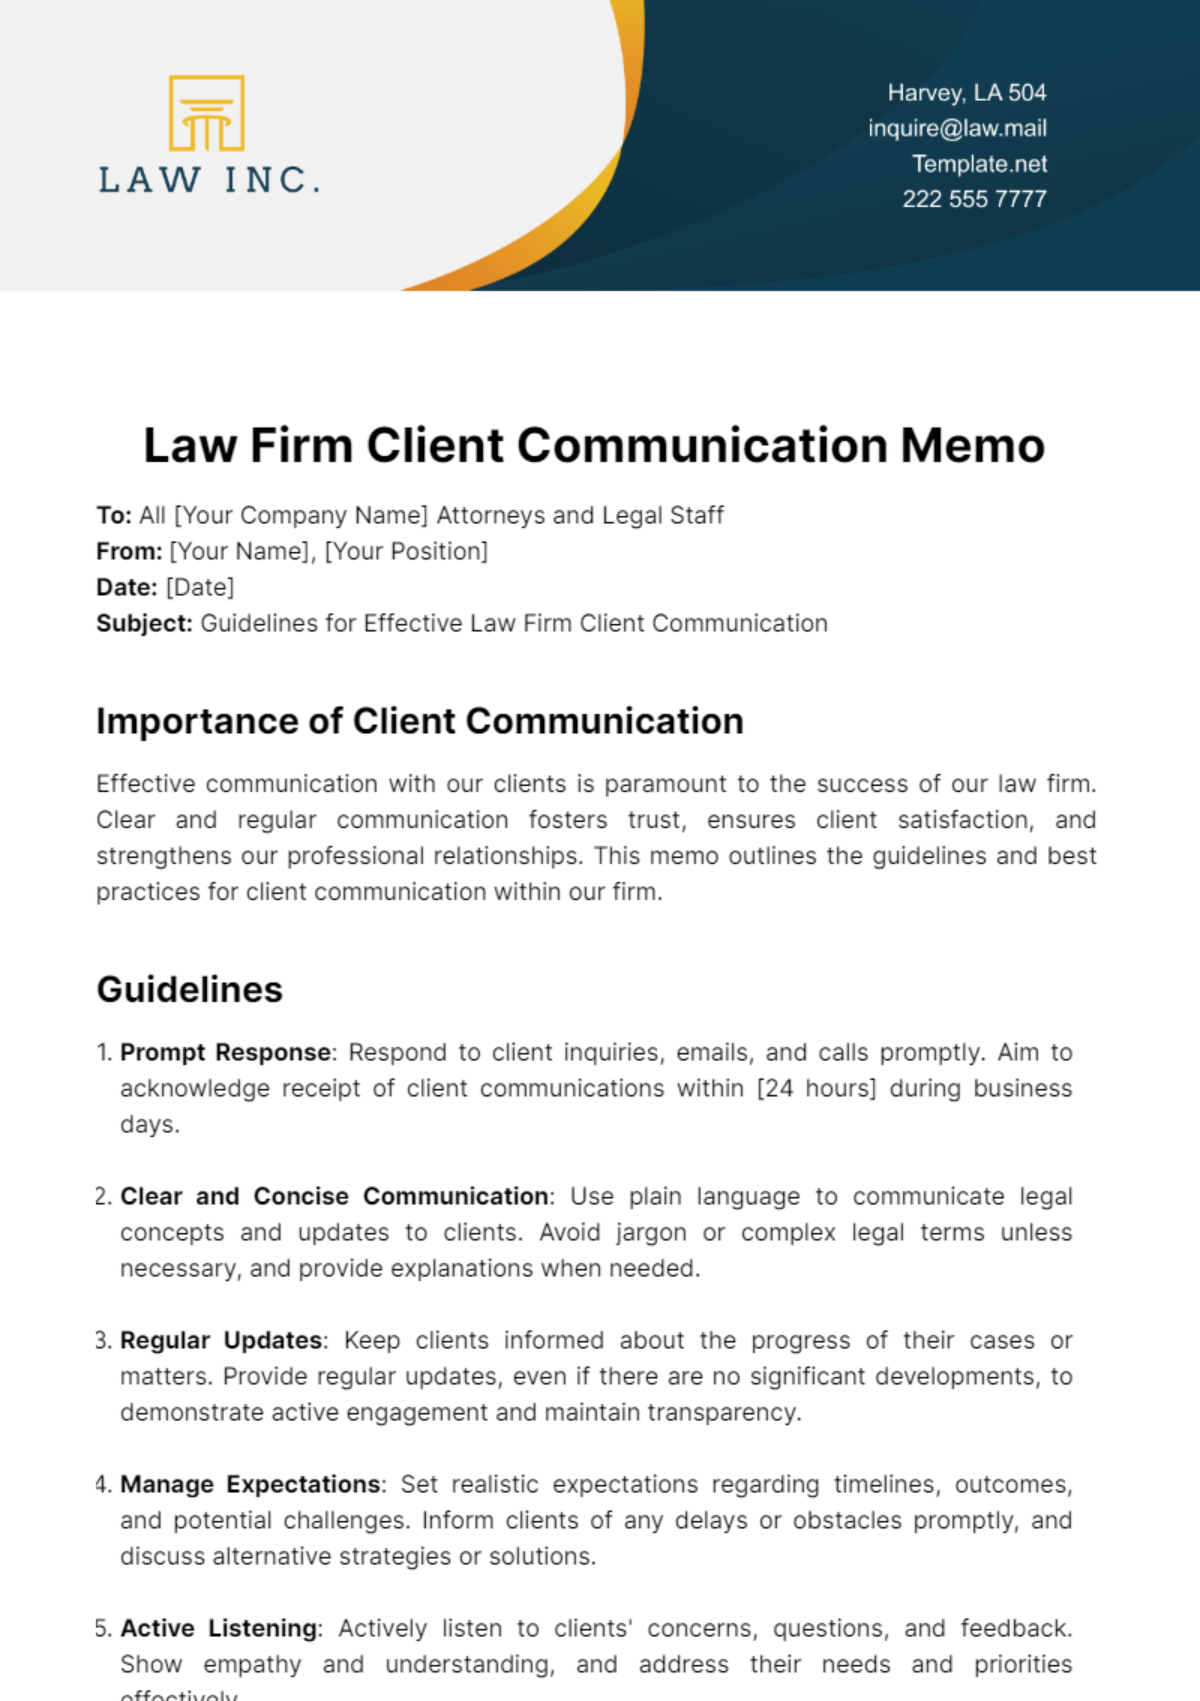 Law Firm Client Communication Memo Template